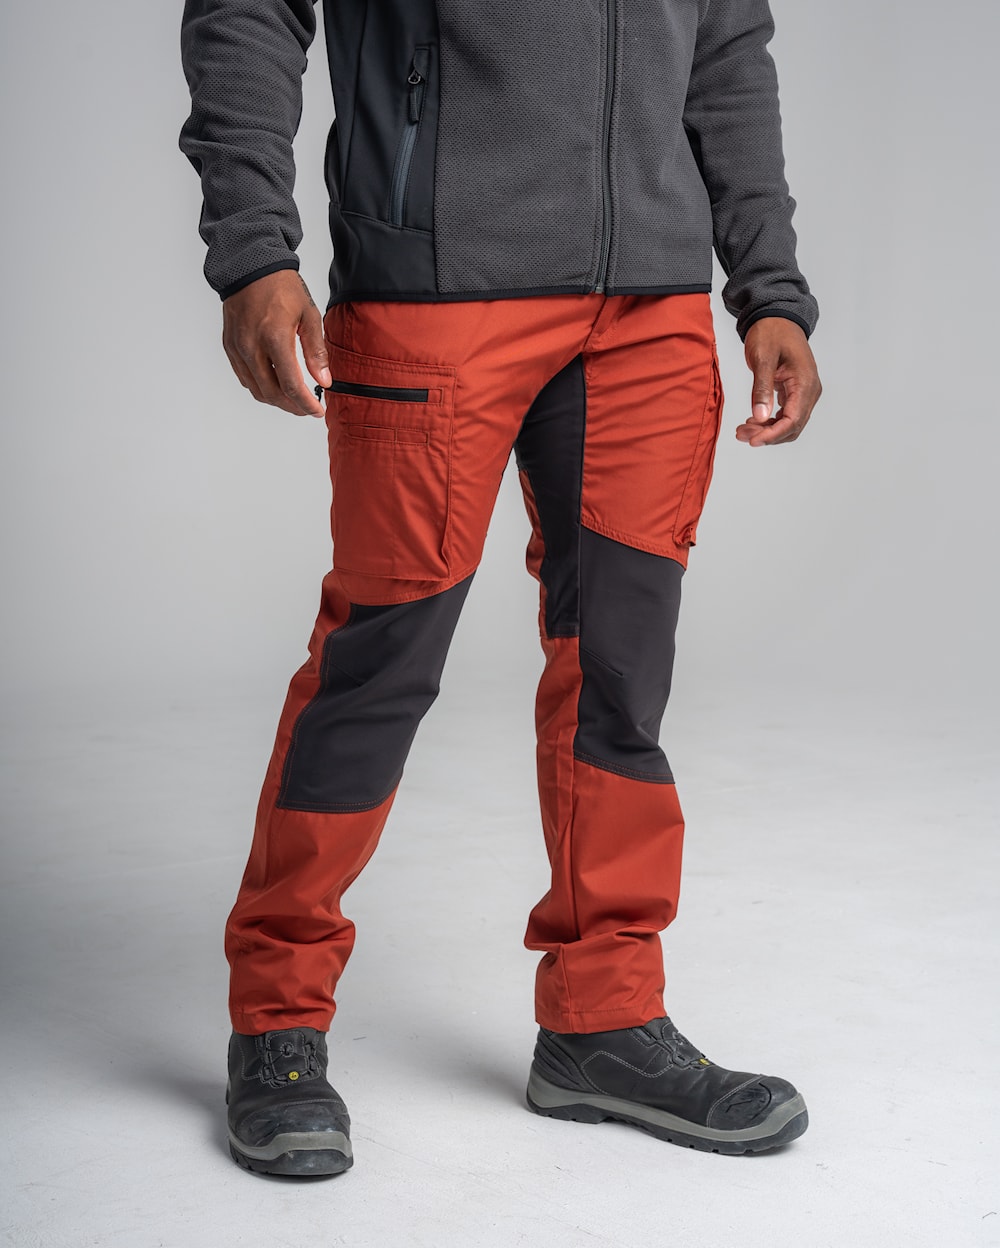 Blaklader Service Pants with Stretch from Columbia Safety